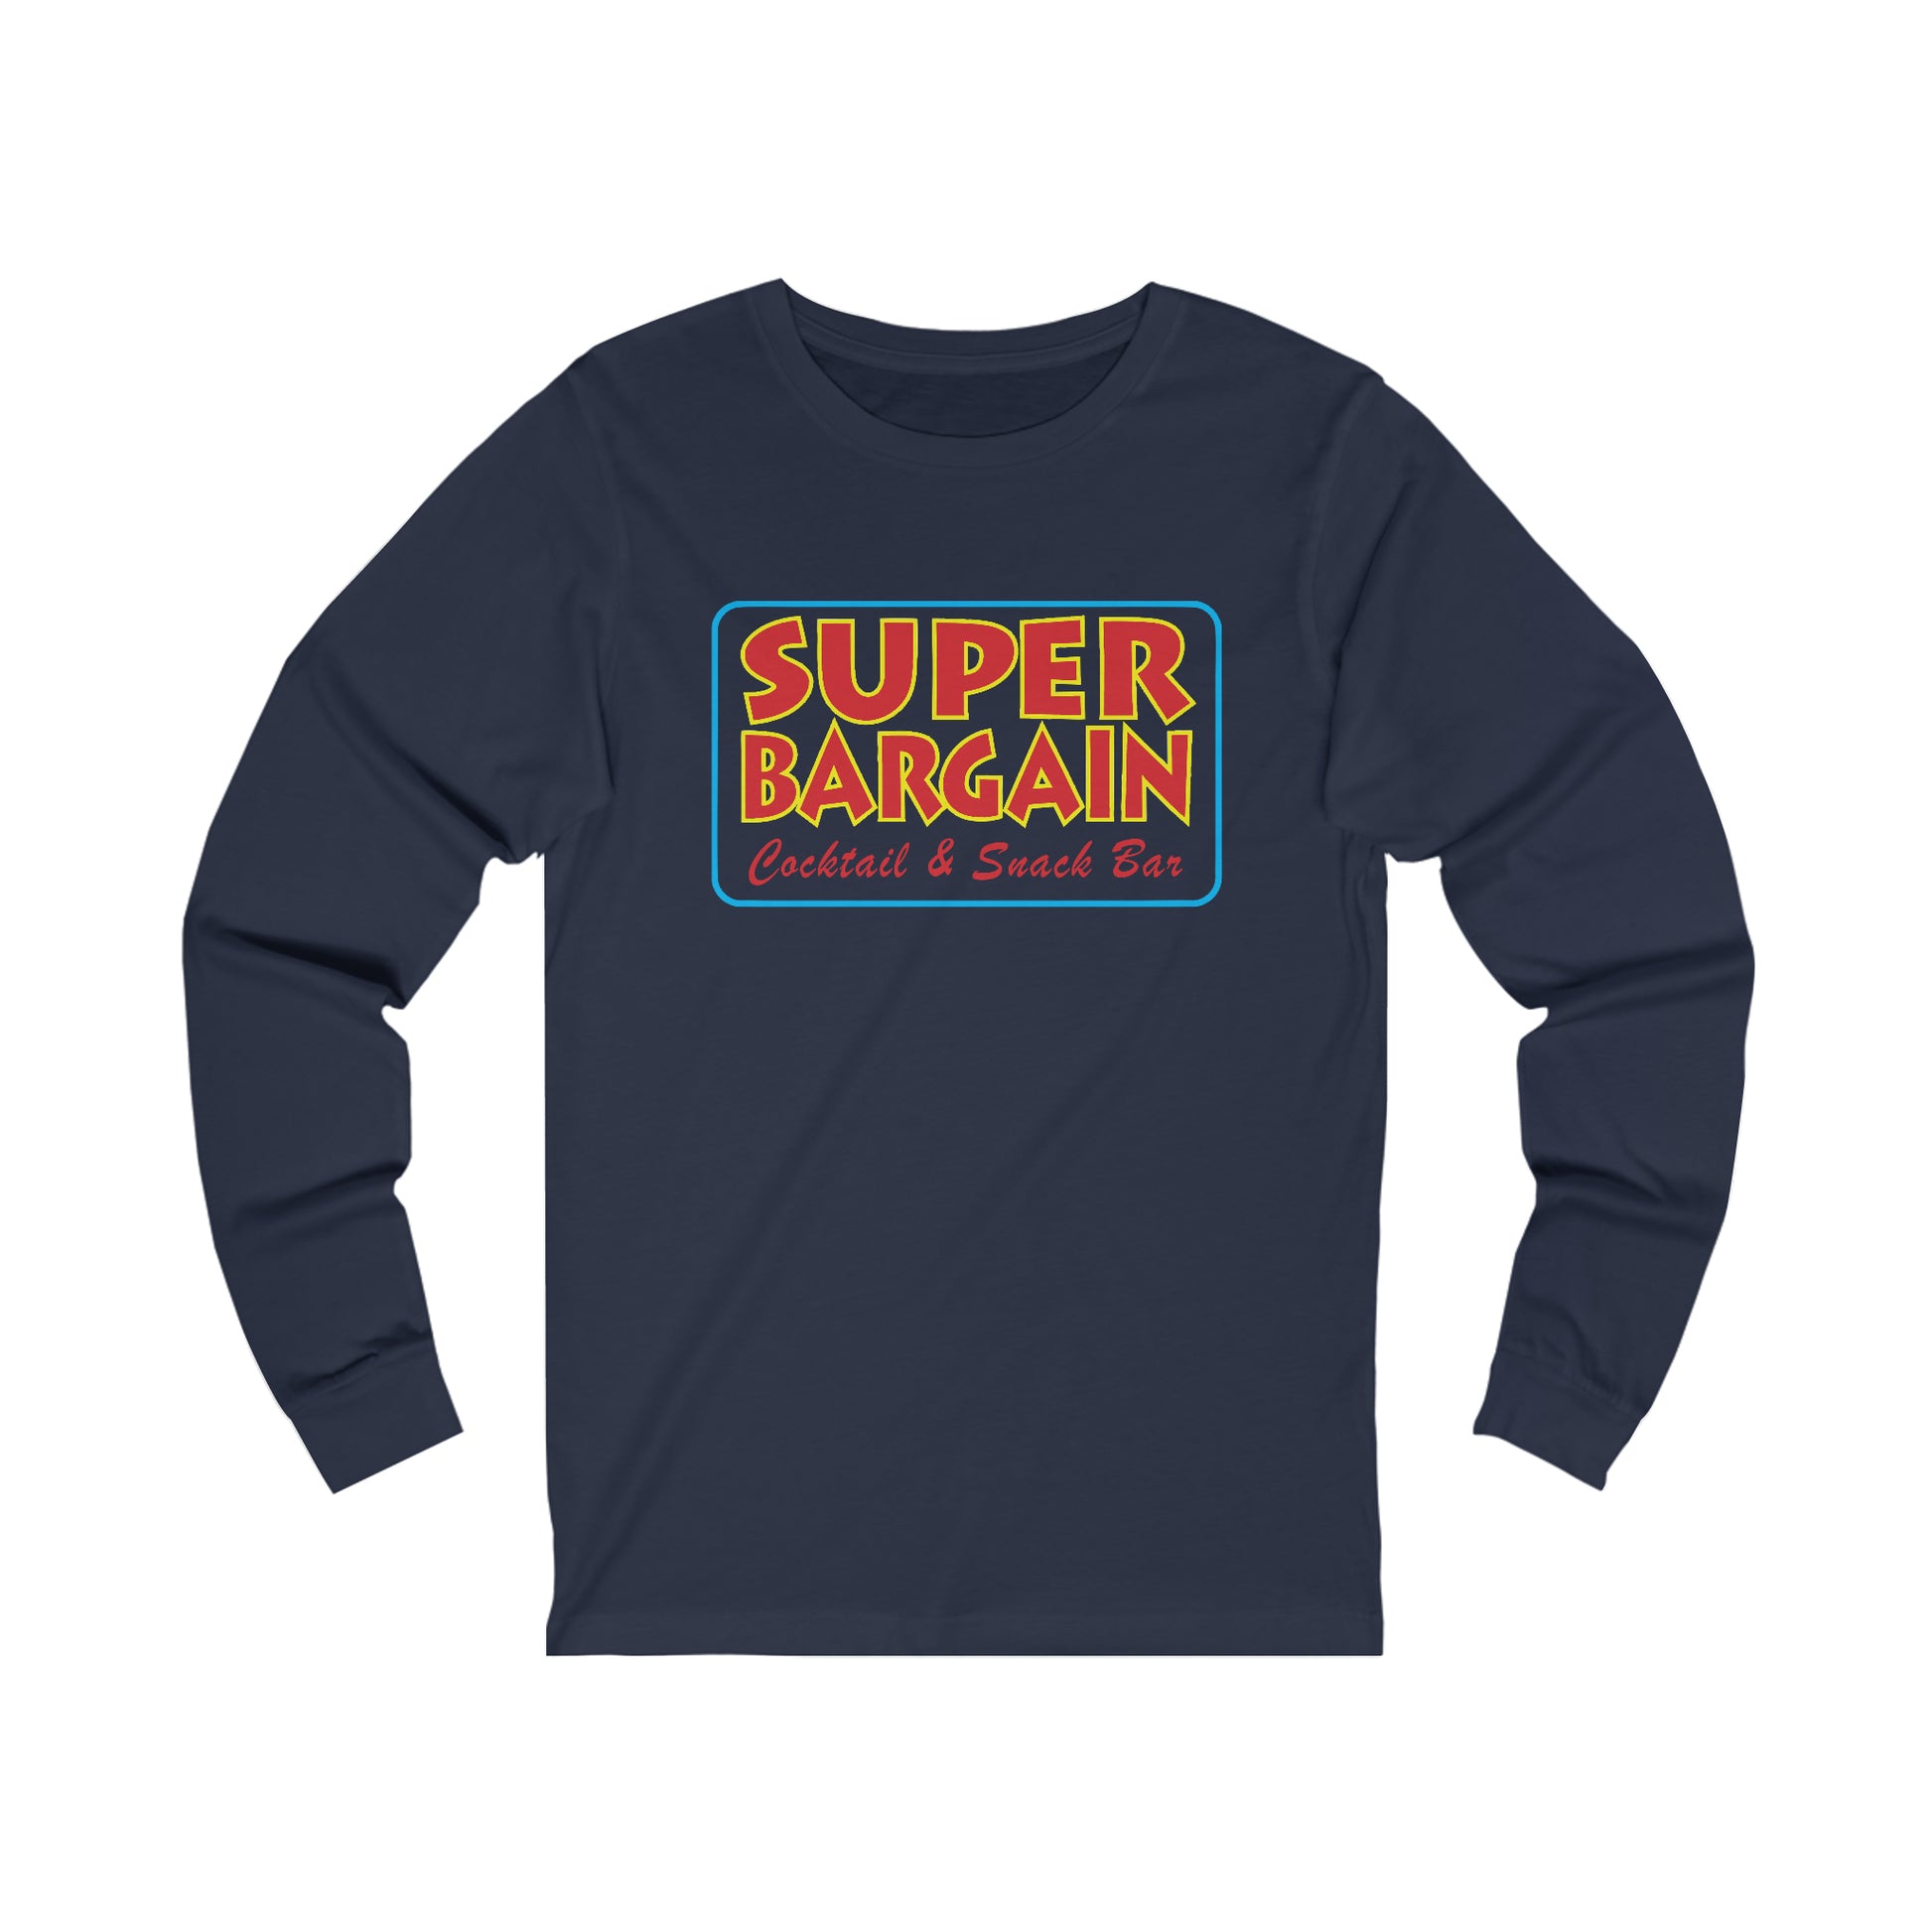 A Printify Unisex Jersey Long Sleeve Signature Logo Tee featuring a colorful retro graphic that reads "SUPER BARGAIN Cocktail & Snack Bar, Cabbagetown" in bold, stylized text.